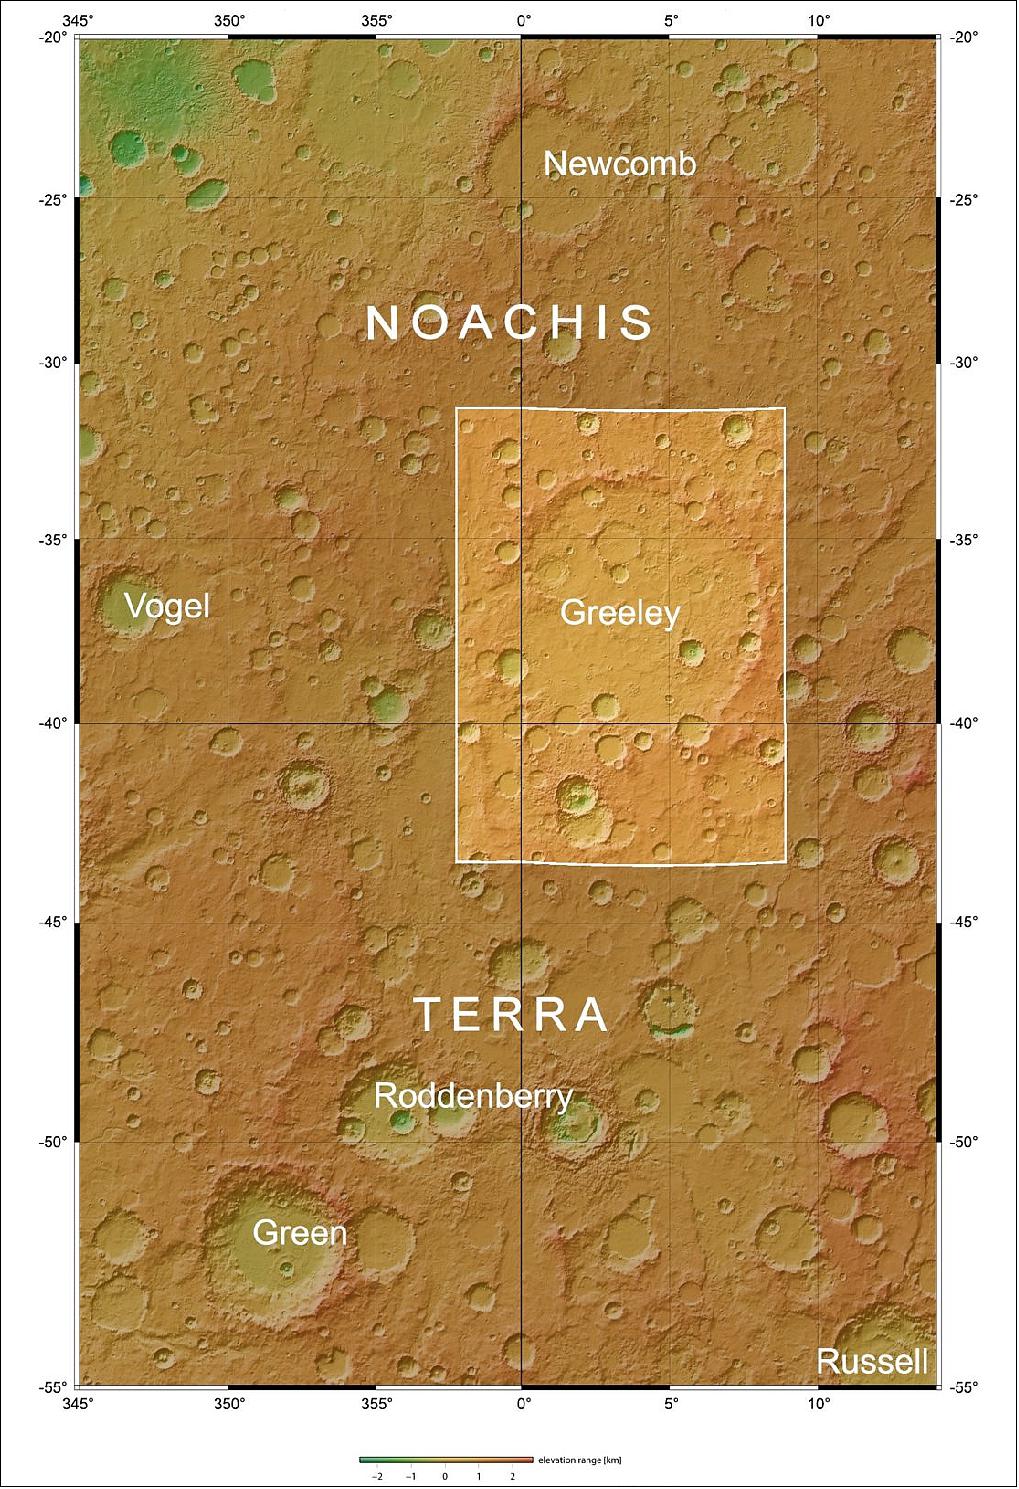 Figure 69: The Greeley crater is a degraded impact crater in the Southern Highlands of Mars. The region outlined by the larger white box indicates the area imaged over 16 Mars Express orbits (0430, 1910, 1932, 2412, 2467, 2478, 4306, 4317, 4328, 6556, 8613, 8620, 8708, 12835, 14719, 16778). In this context image, north is up (image credit: NASA MGS MOLA Science Team) 29)